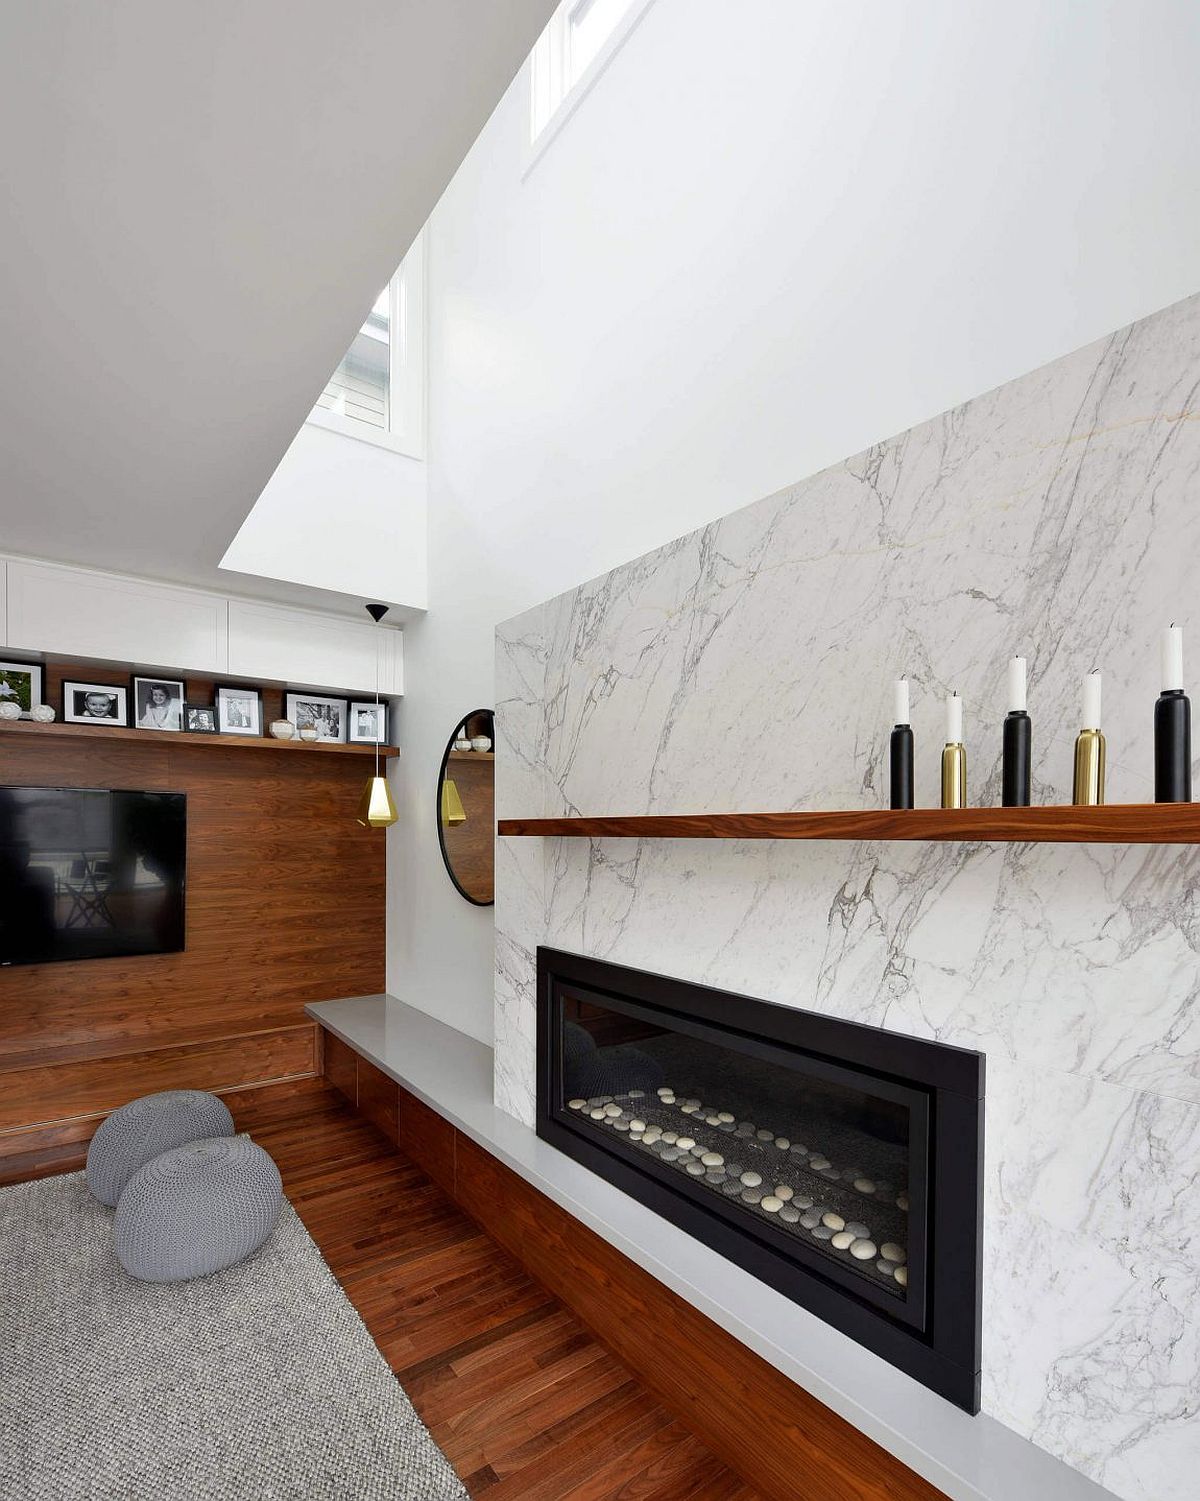 Marble-around-the-fireplace-along-with-the-wooden-TV-wall-bring-in-textural-contrast